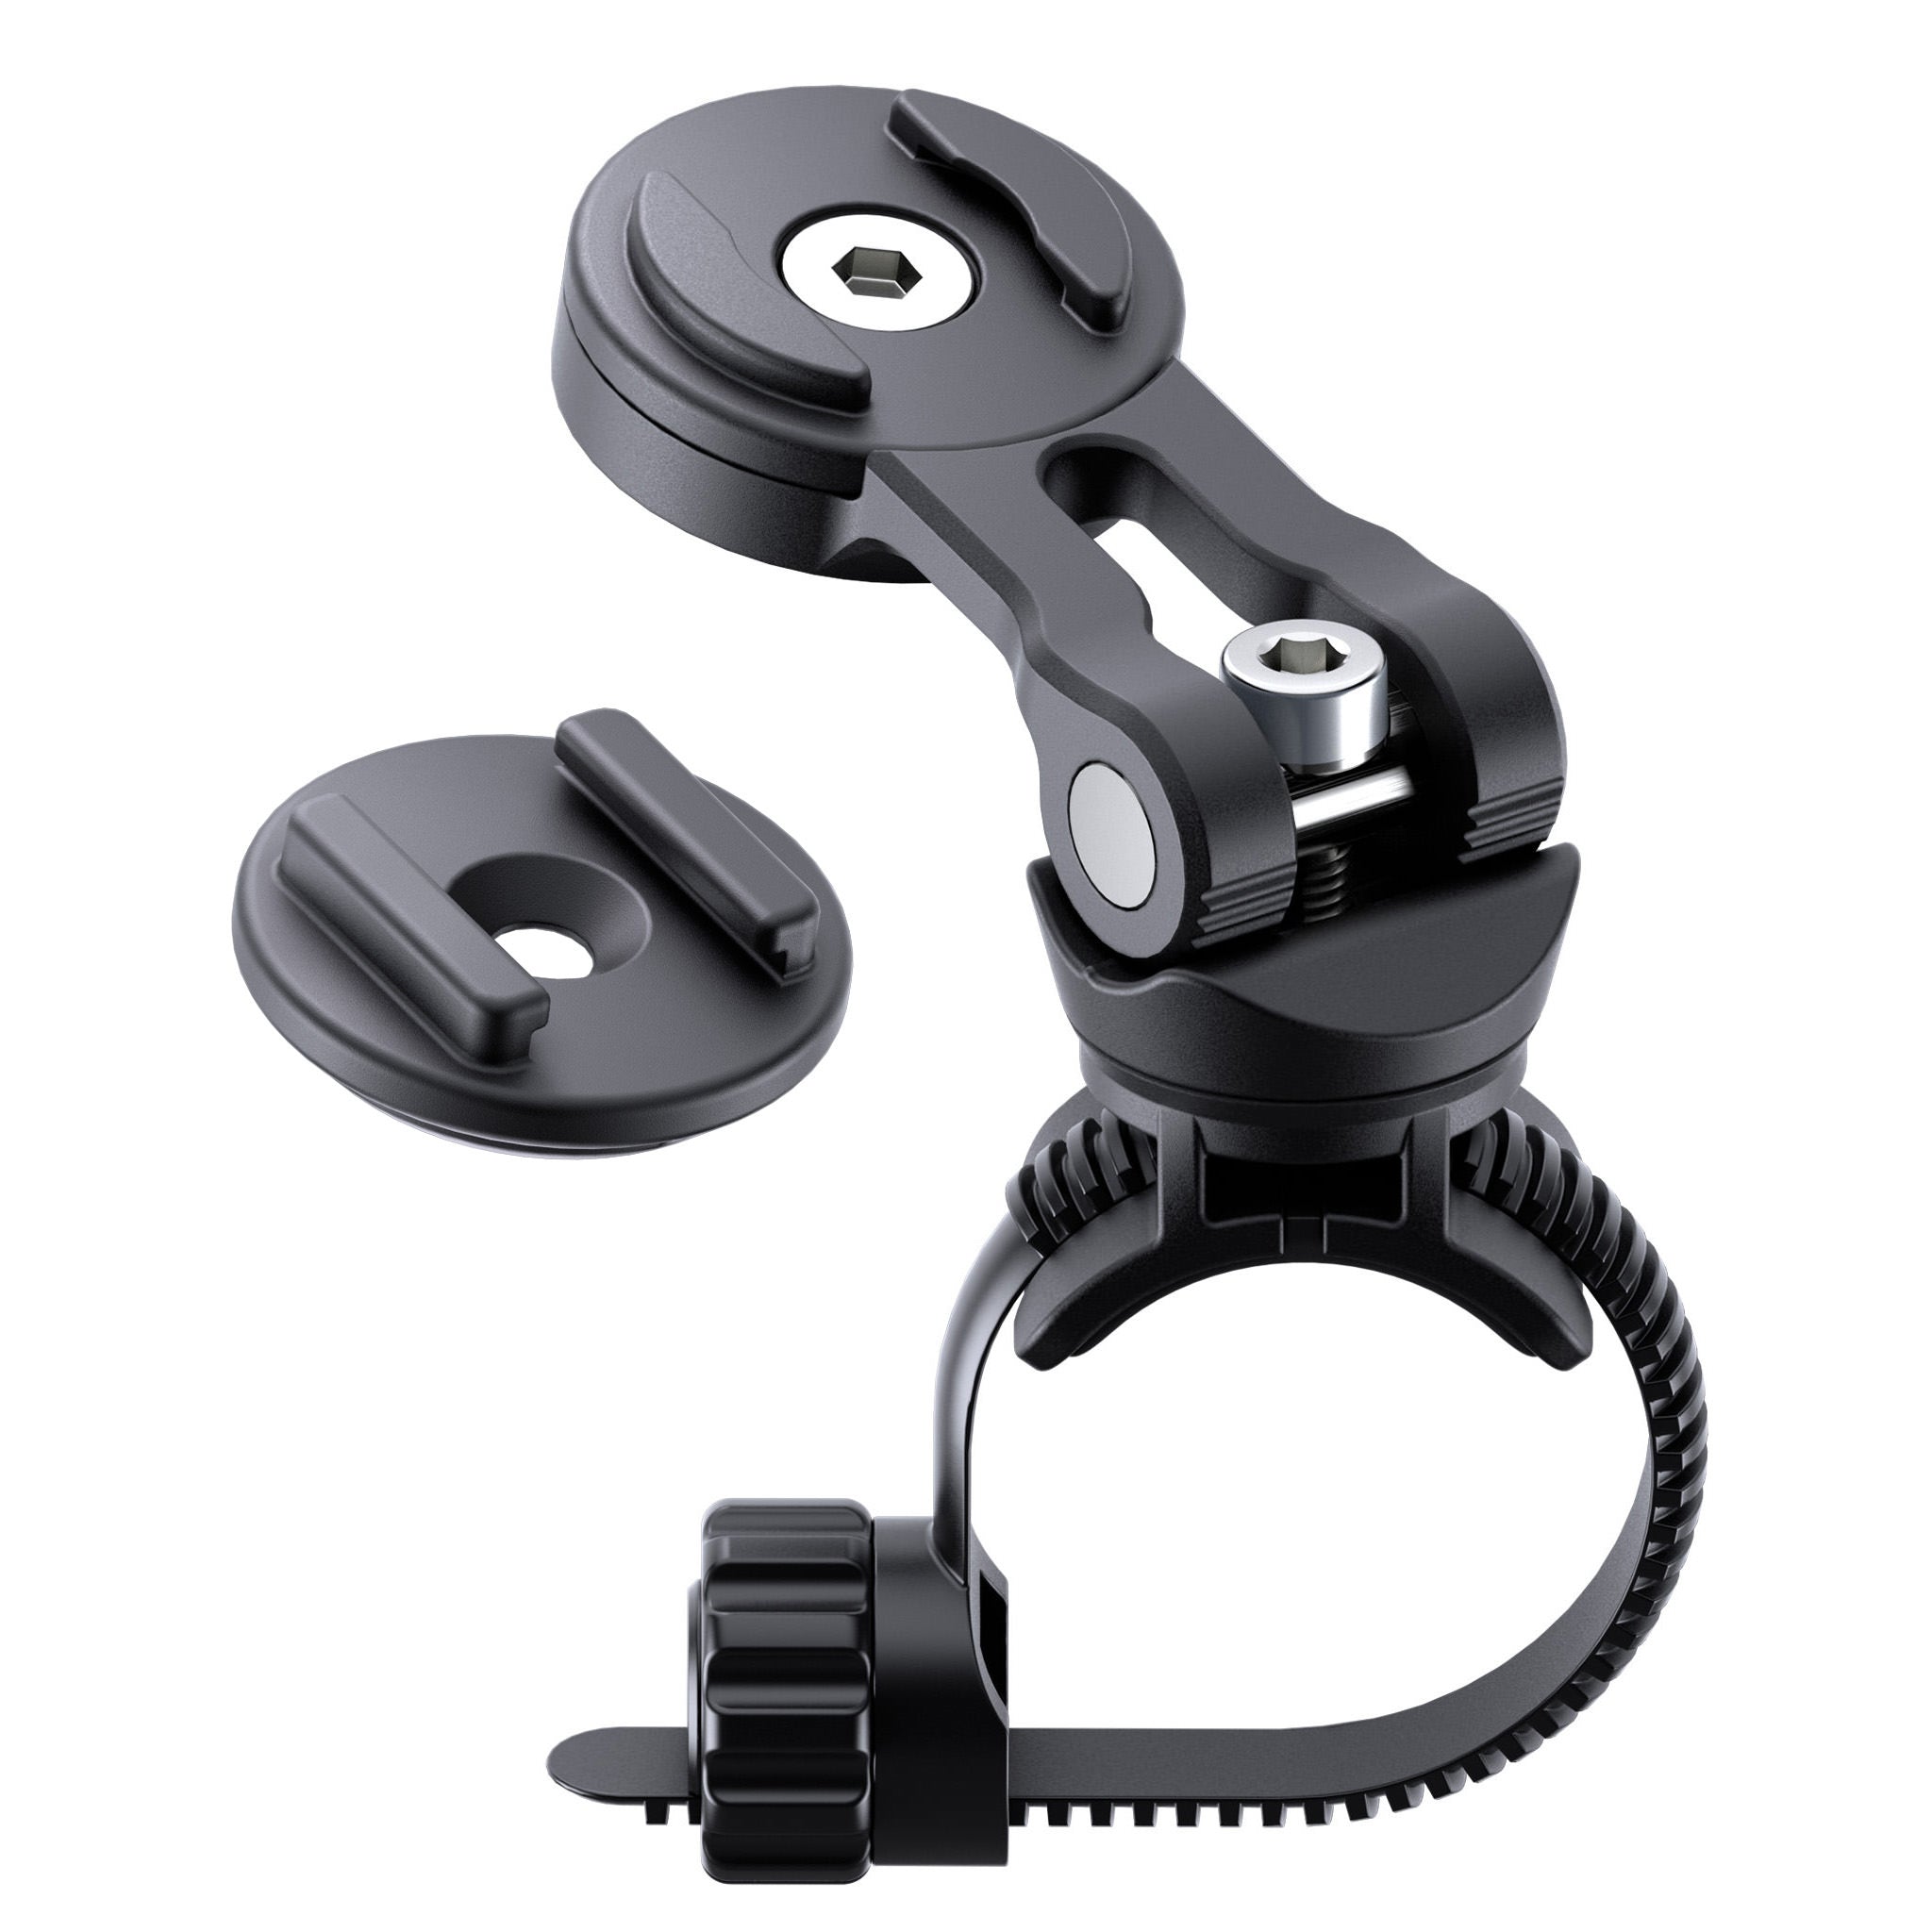 SP CONNECT Bike Bundle Phone Holder compatible with India